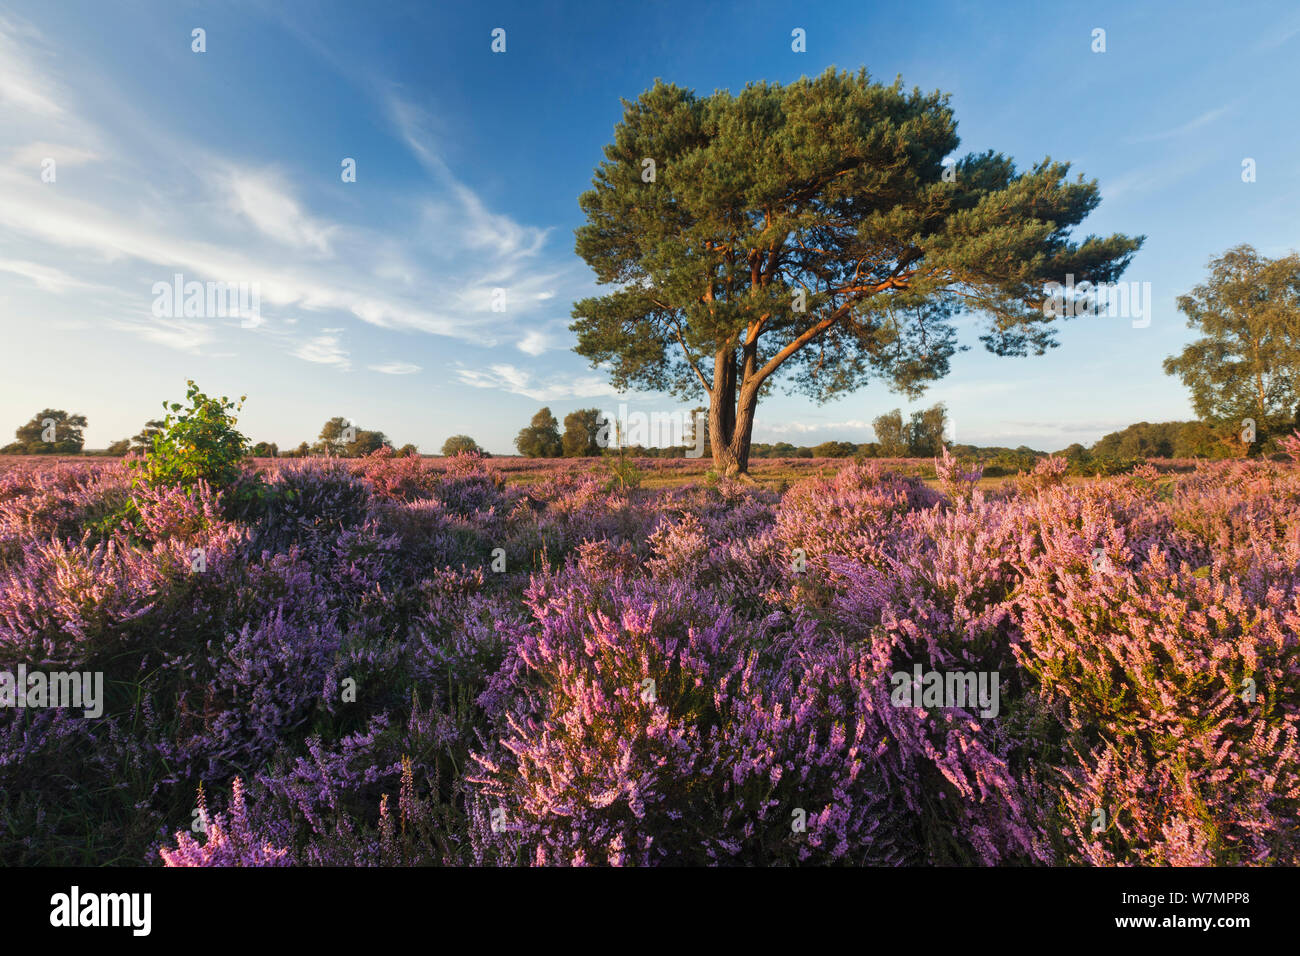 Pine tree on heathland with Ling (Calluna vulgaris) and Bell Heather (Erica cinerea) flowering. New Forest National Park, Hampshire, England, UK, August. Stock Photo